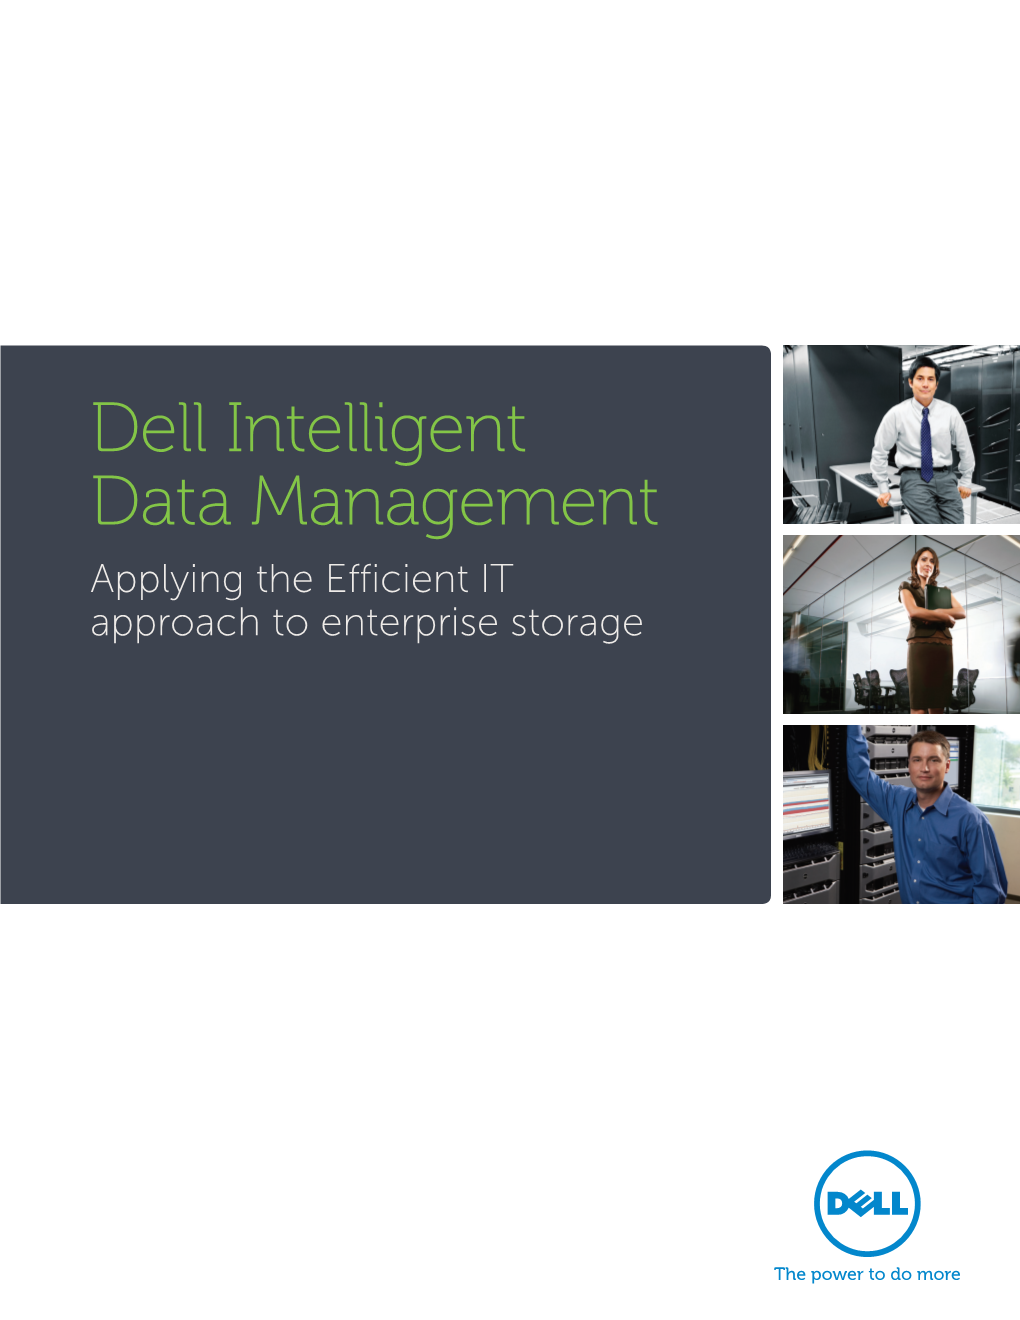 Dell Intelligent Data Management Applying the Efficient IT Approach to Enterprise Storage Executive Summary